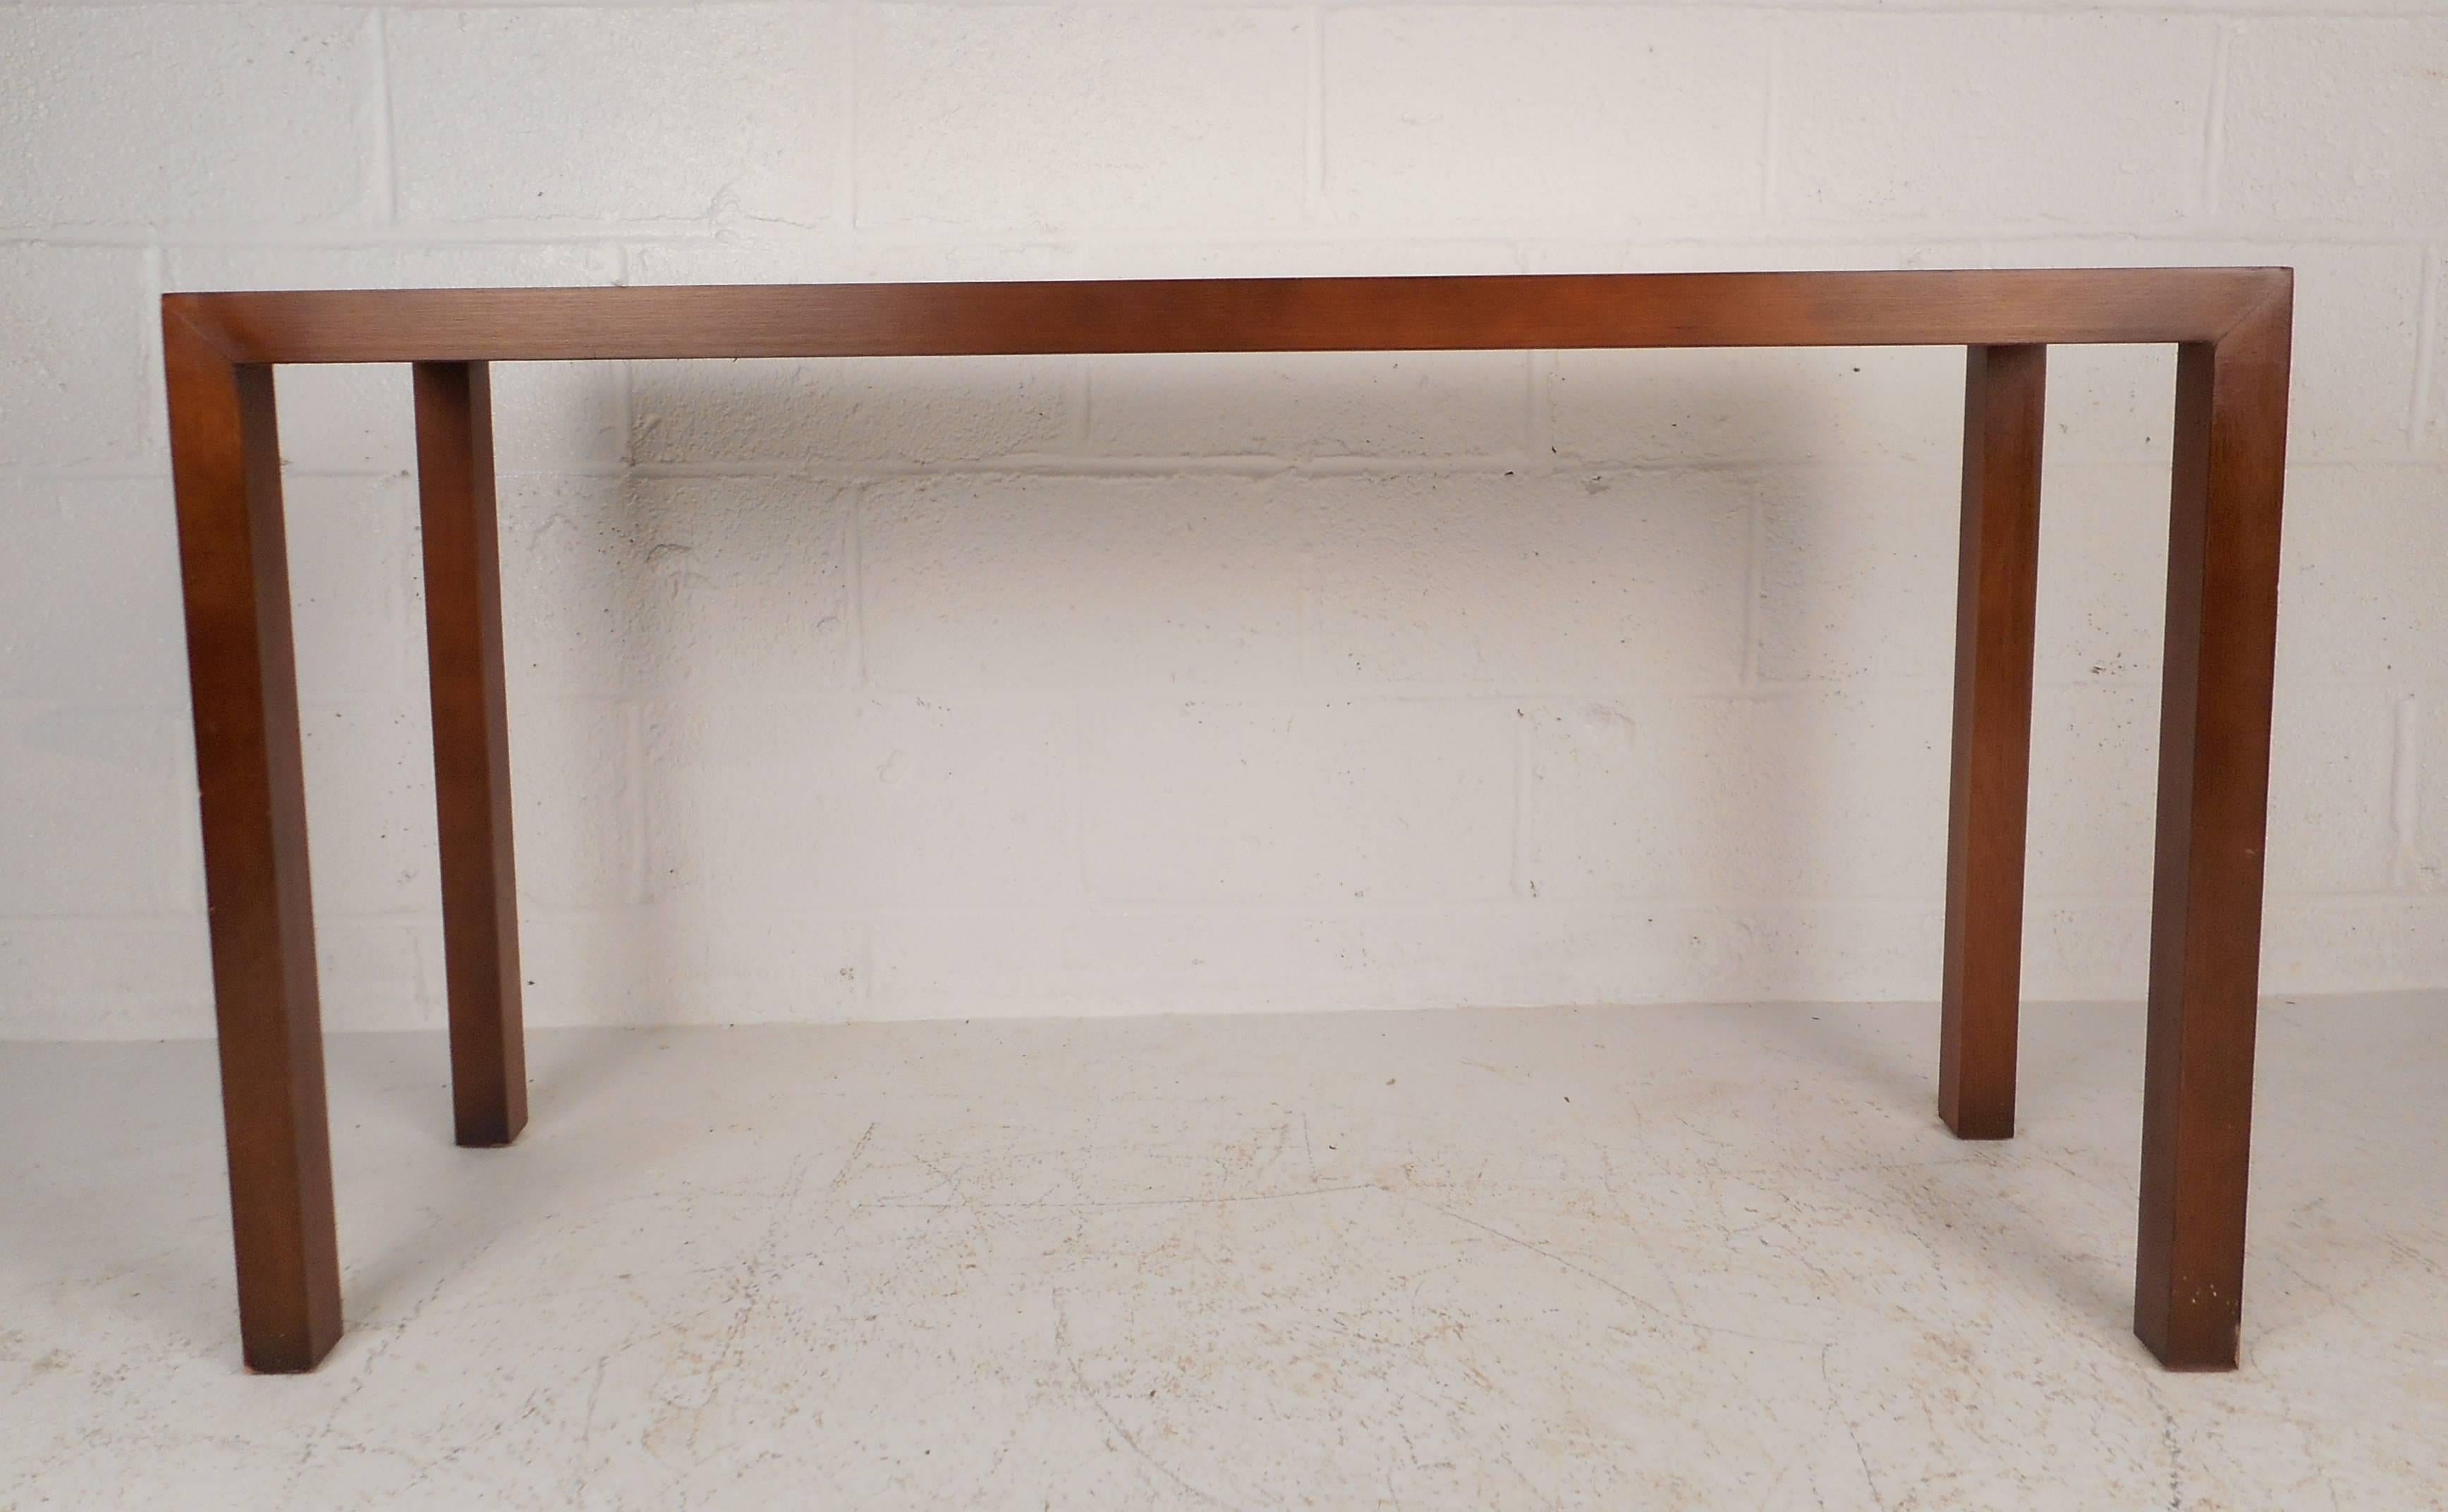 This beautiful vintage modern console table has four long sturdy legs and a rectangular top. Sleek design with gorgeous wood grain on top running in different directions. This stunning midcentury walnut hall table makes the perfect addition to any